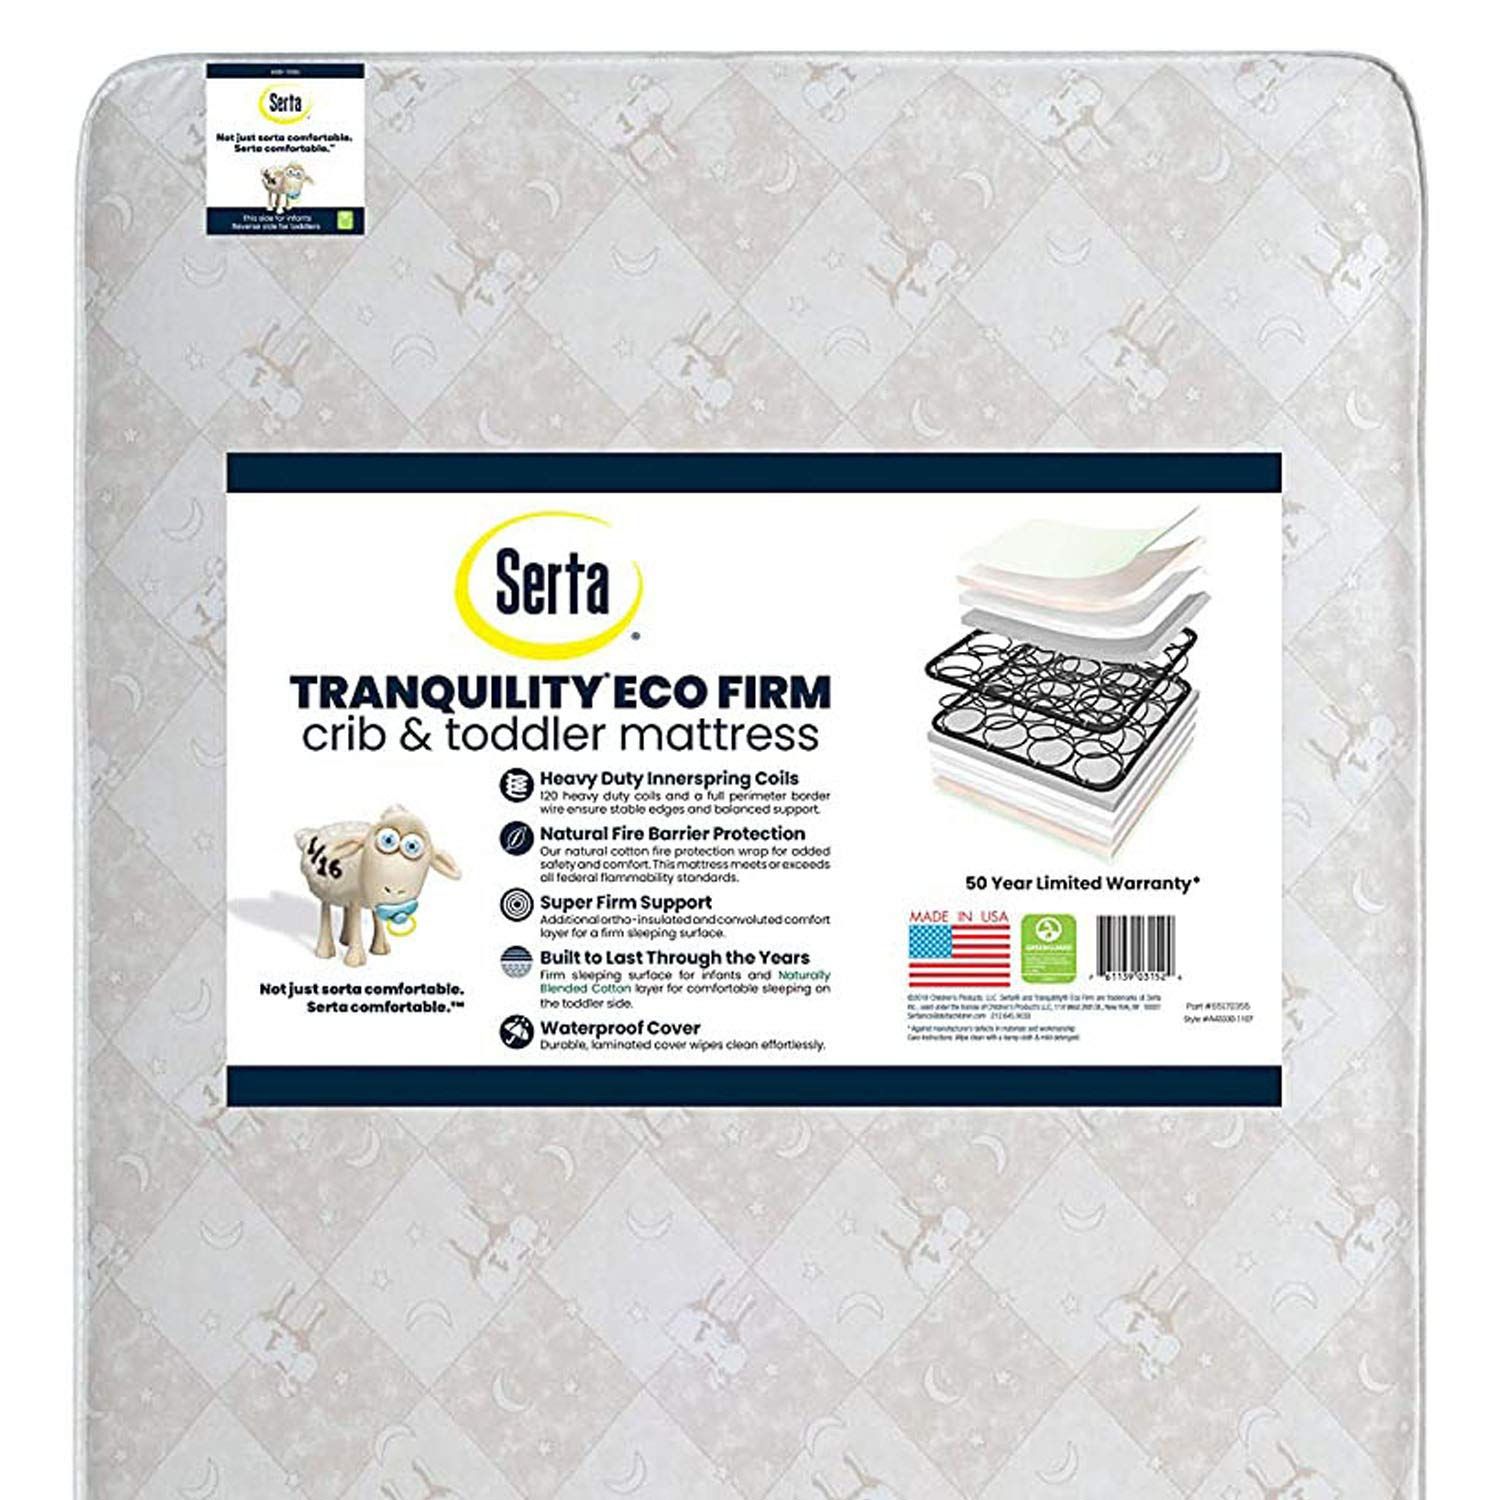 Serta Tranquility Eco Firm 2-Stage Premium Innerspring Crib and Toddler Mattress -Waterproof - GR... | Amazon (US)